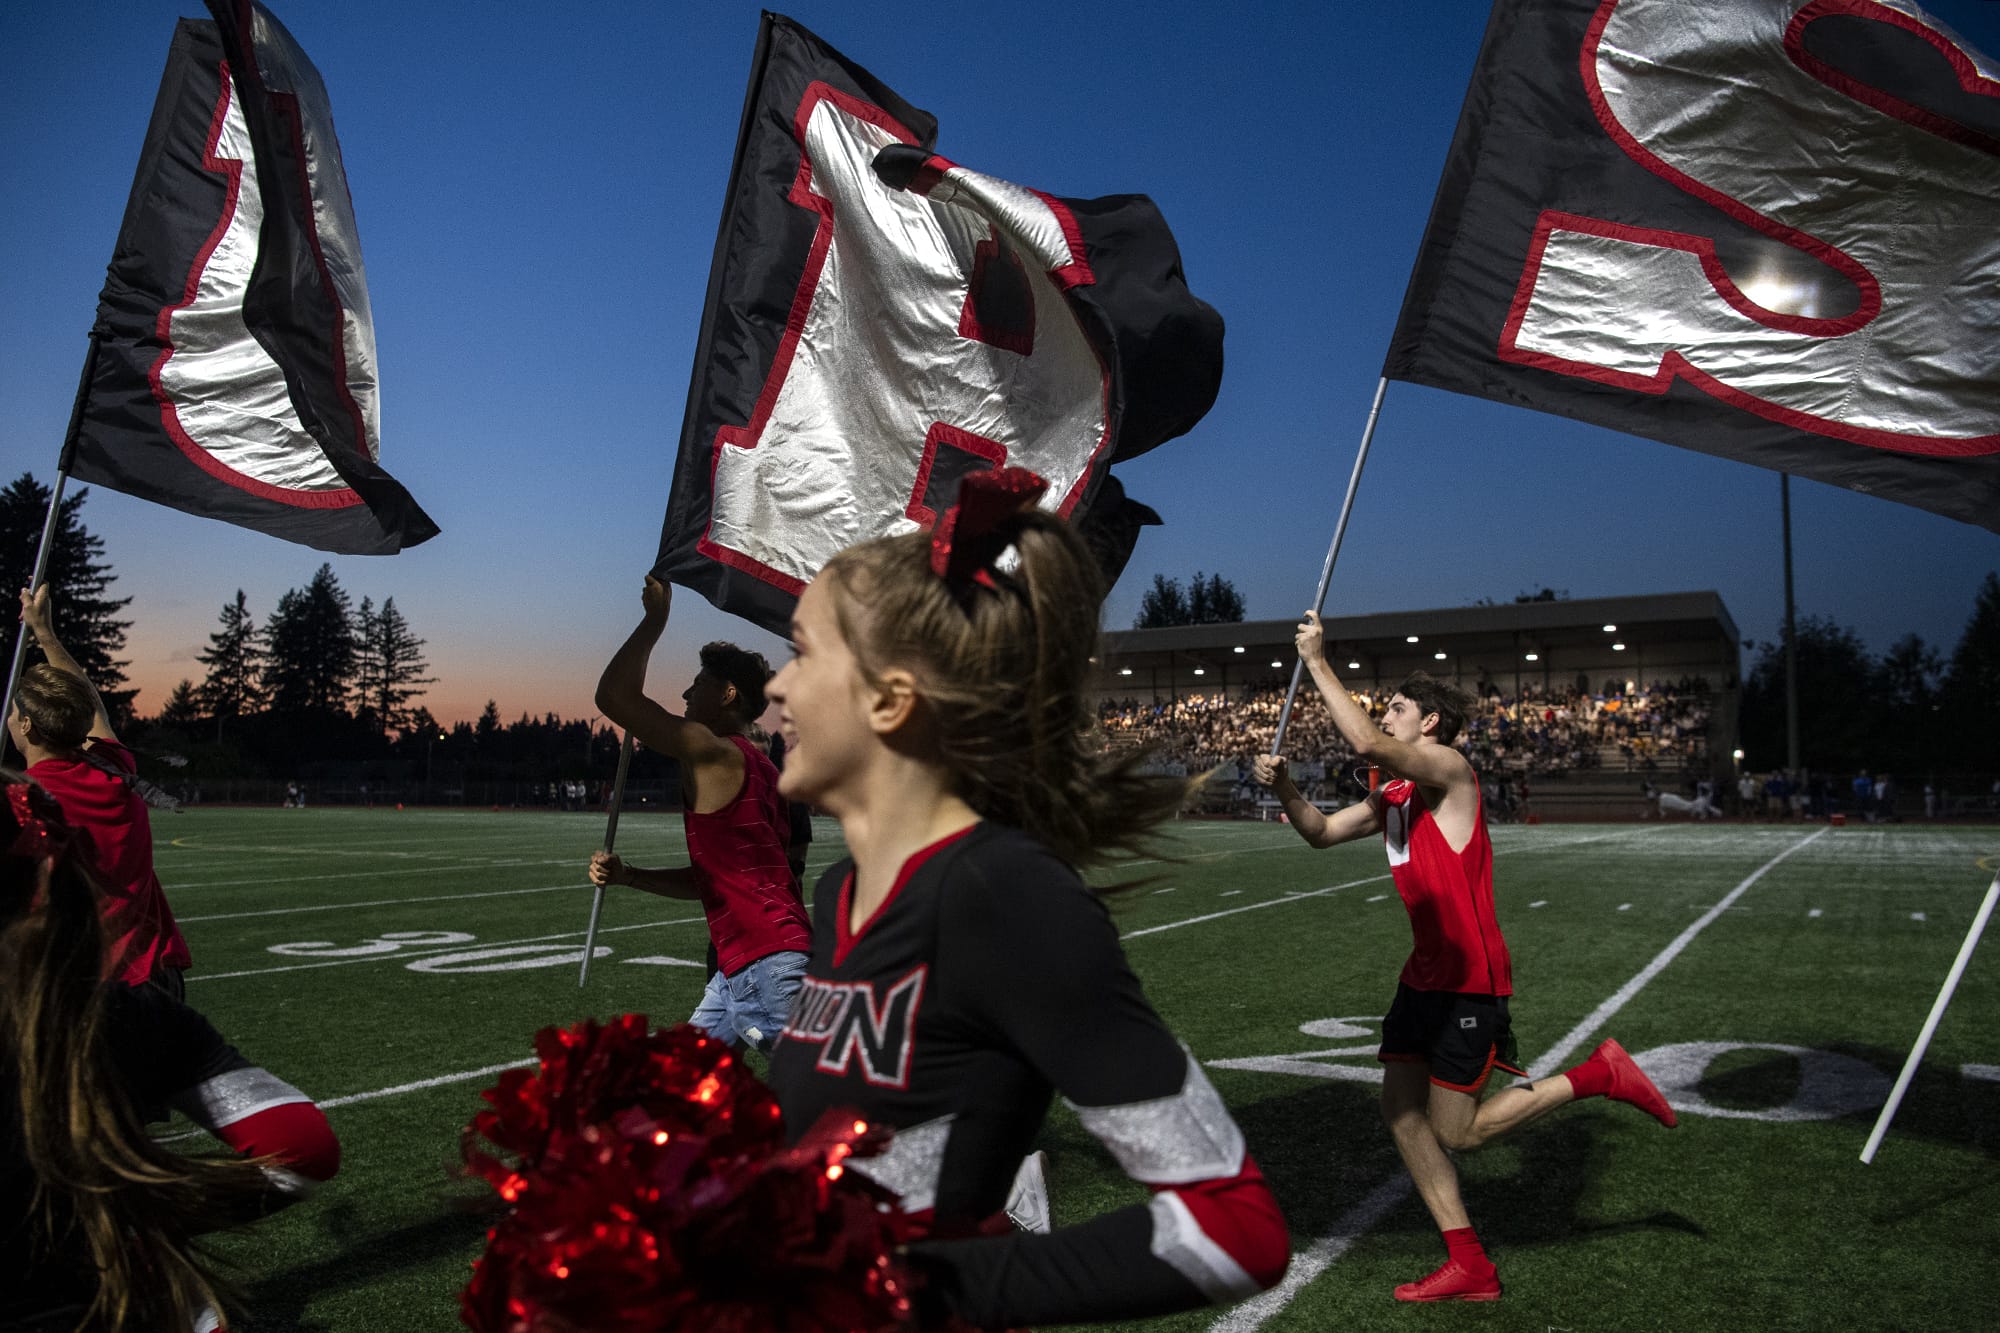 Union fans and cheerleaders rush onto the field with the team during Friday nightÕs game at McKenzie Stadium in Vancouver on Sept. 6, 2019.